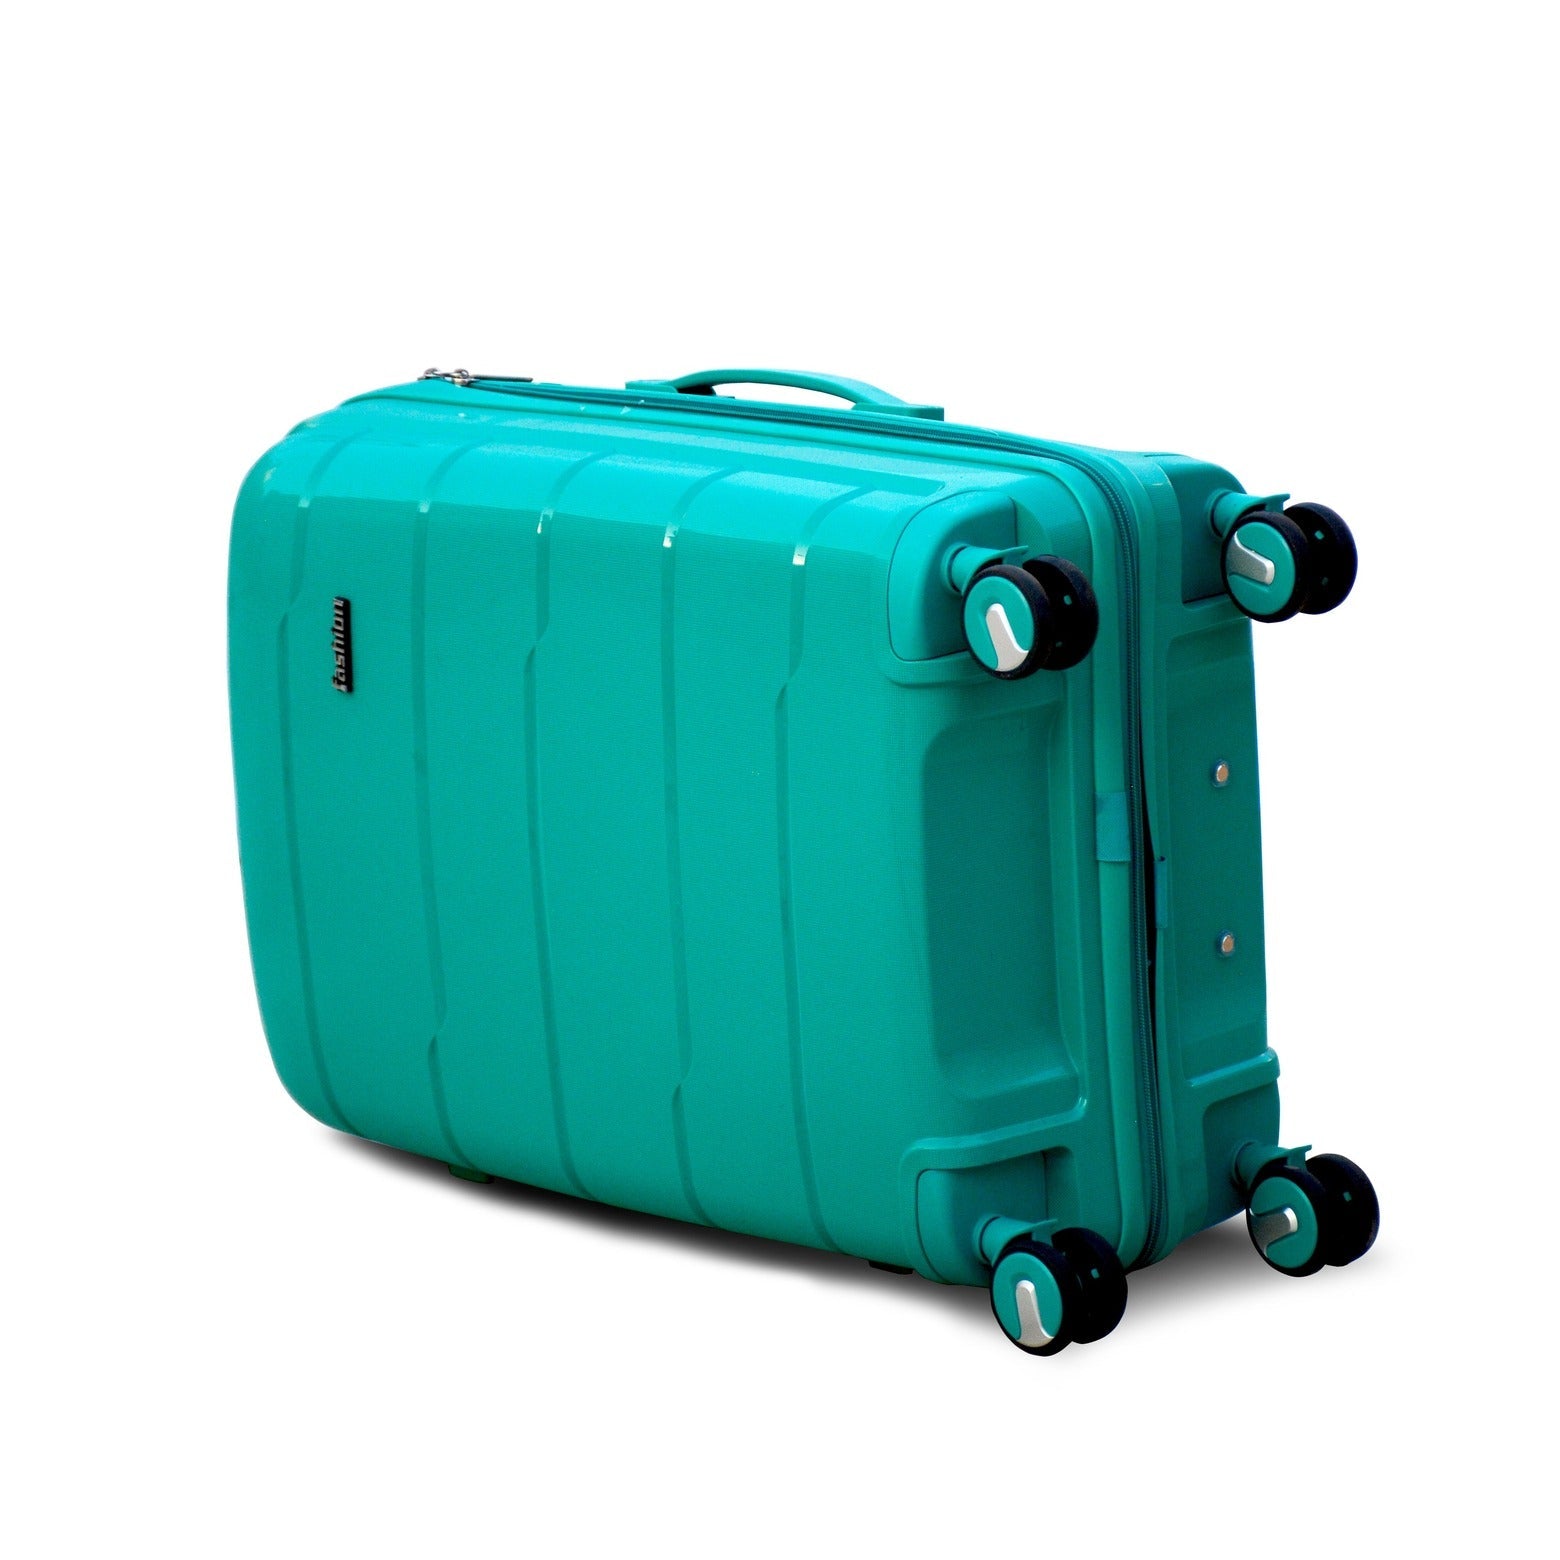 28" Green Colour Non Expandable Ceramic PP Luggage Lightweight Hard Case Trolley Bag with Double Spinner Wheel